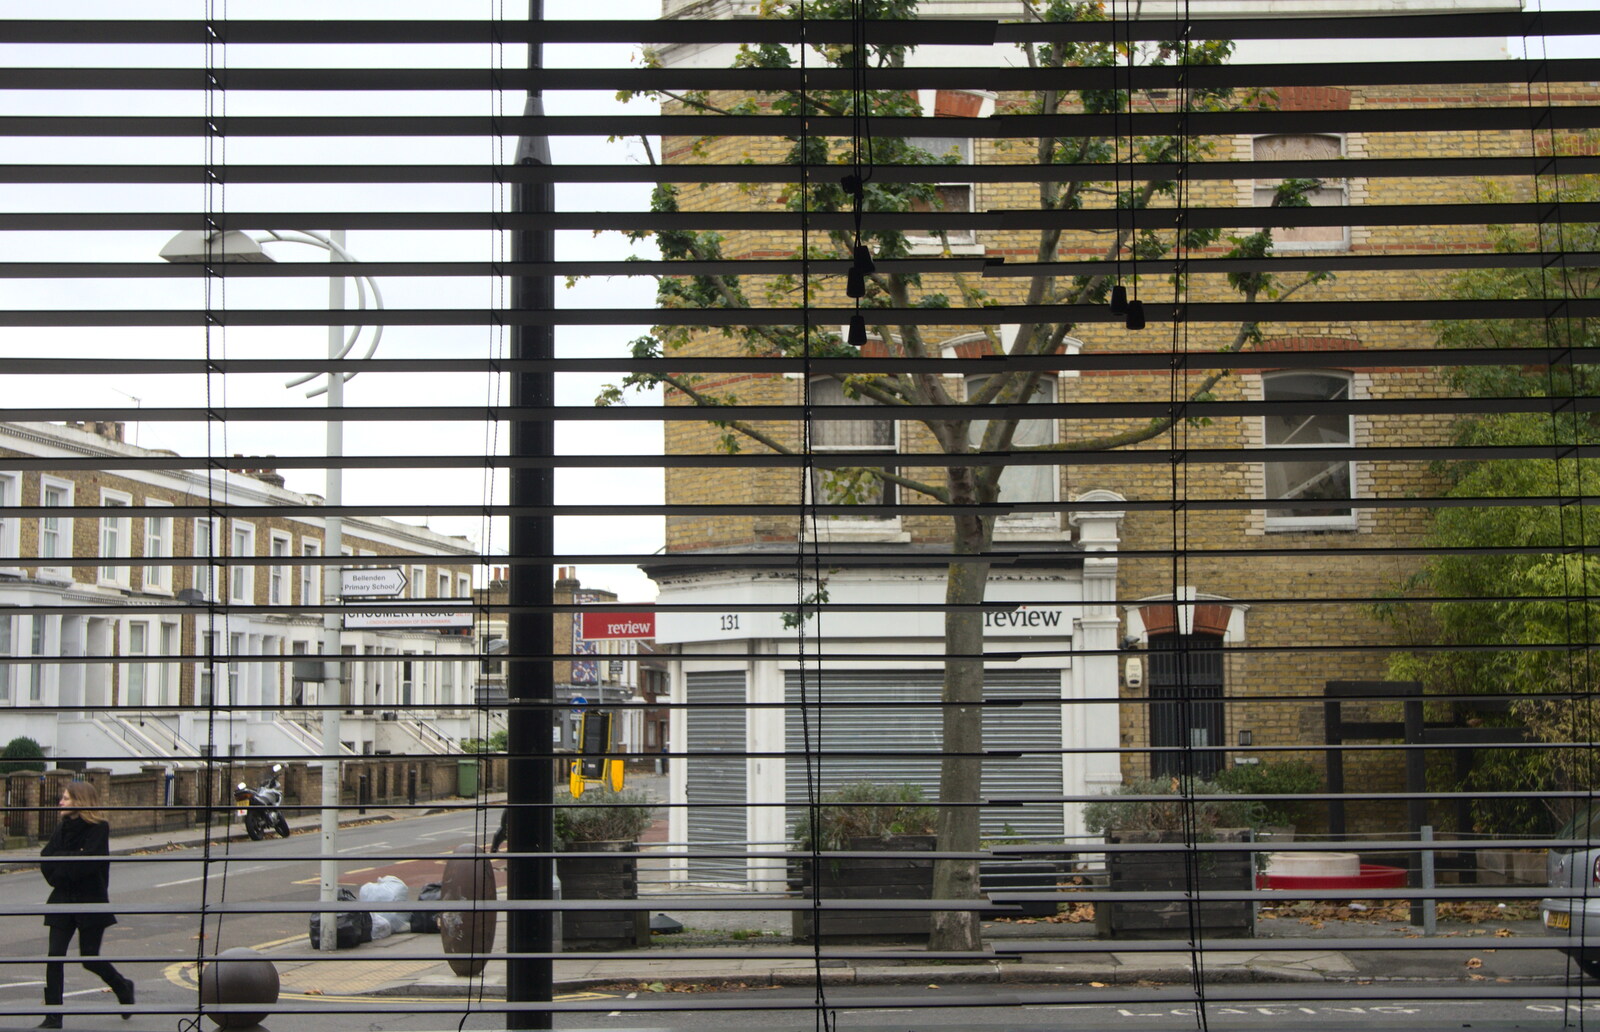 Street view through a Venetian blind from Another Trip to Peckham, Southwark, London - 28th October 2012